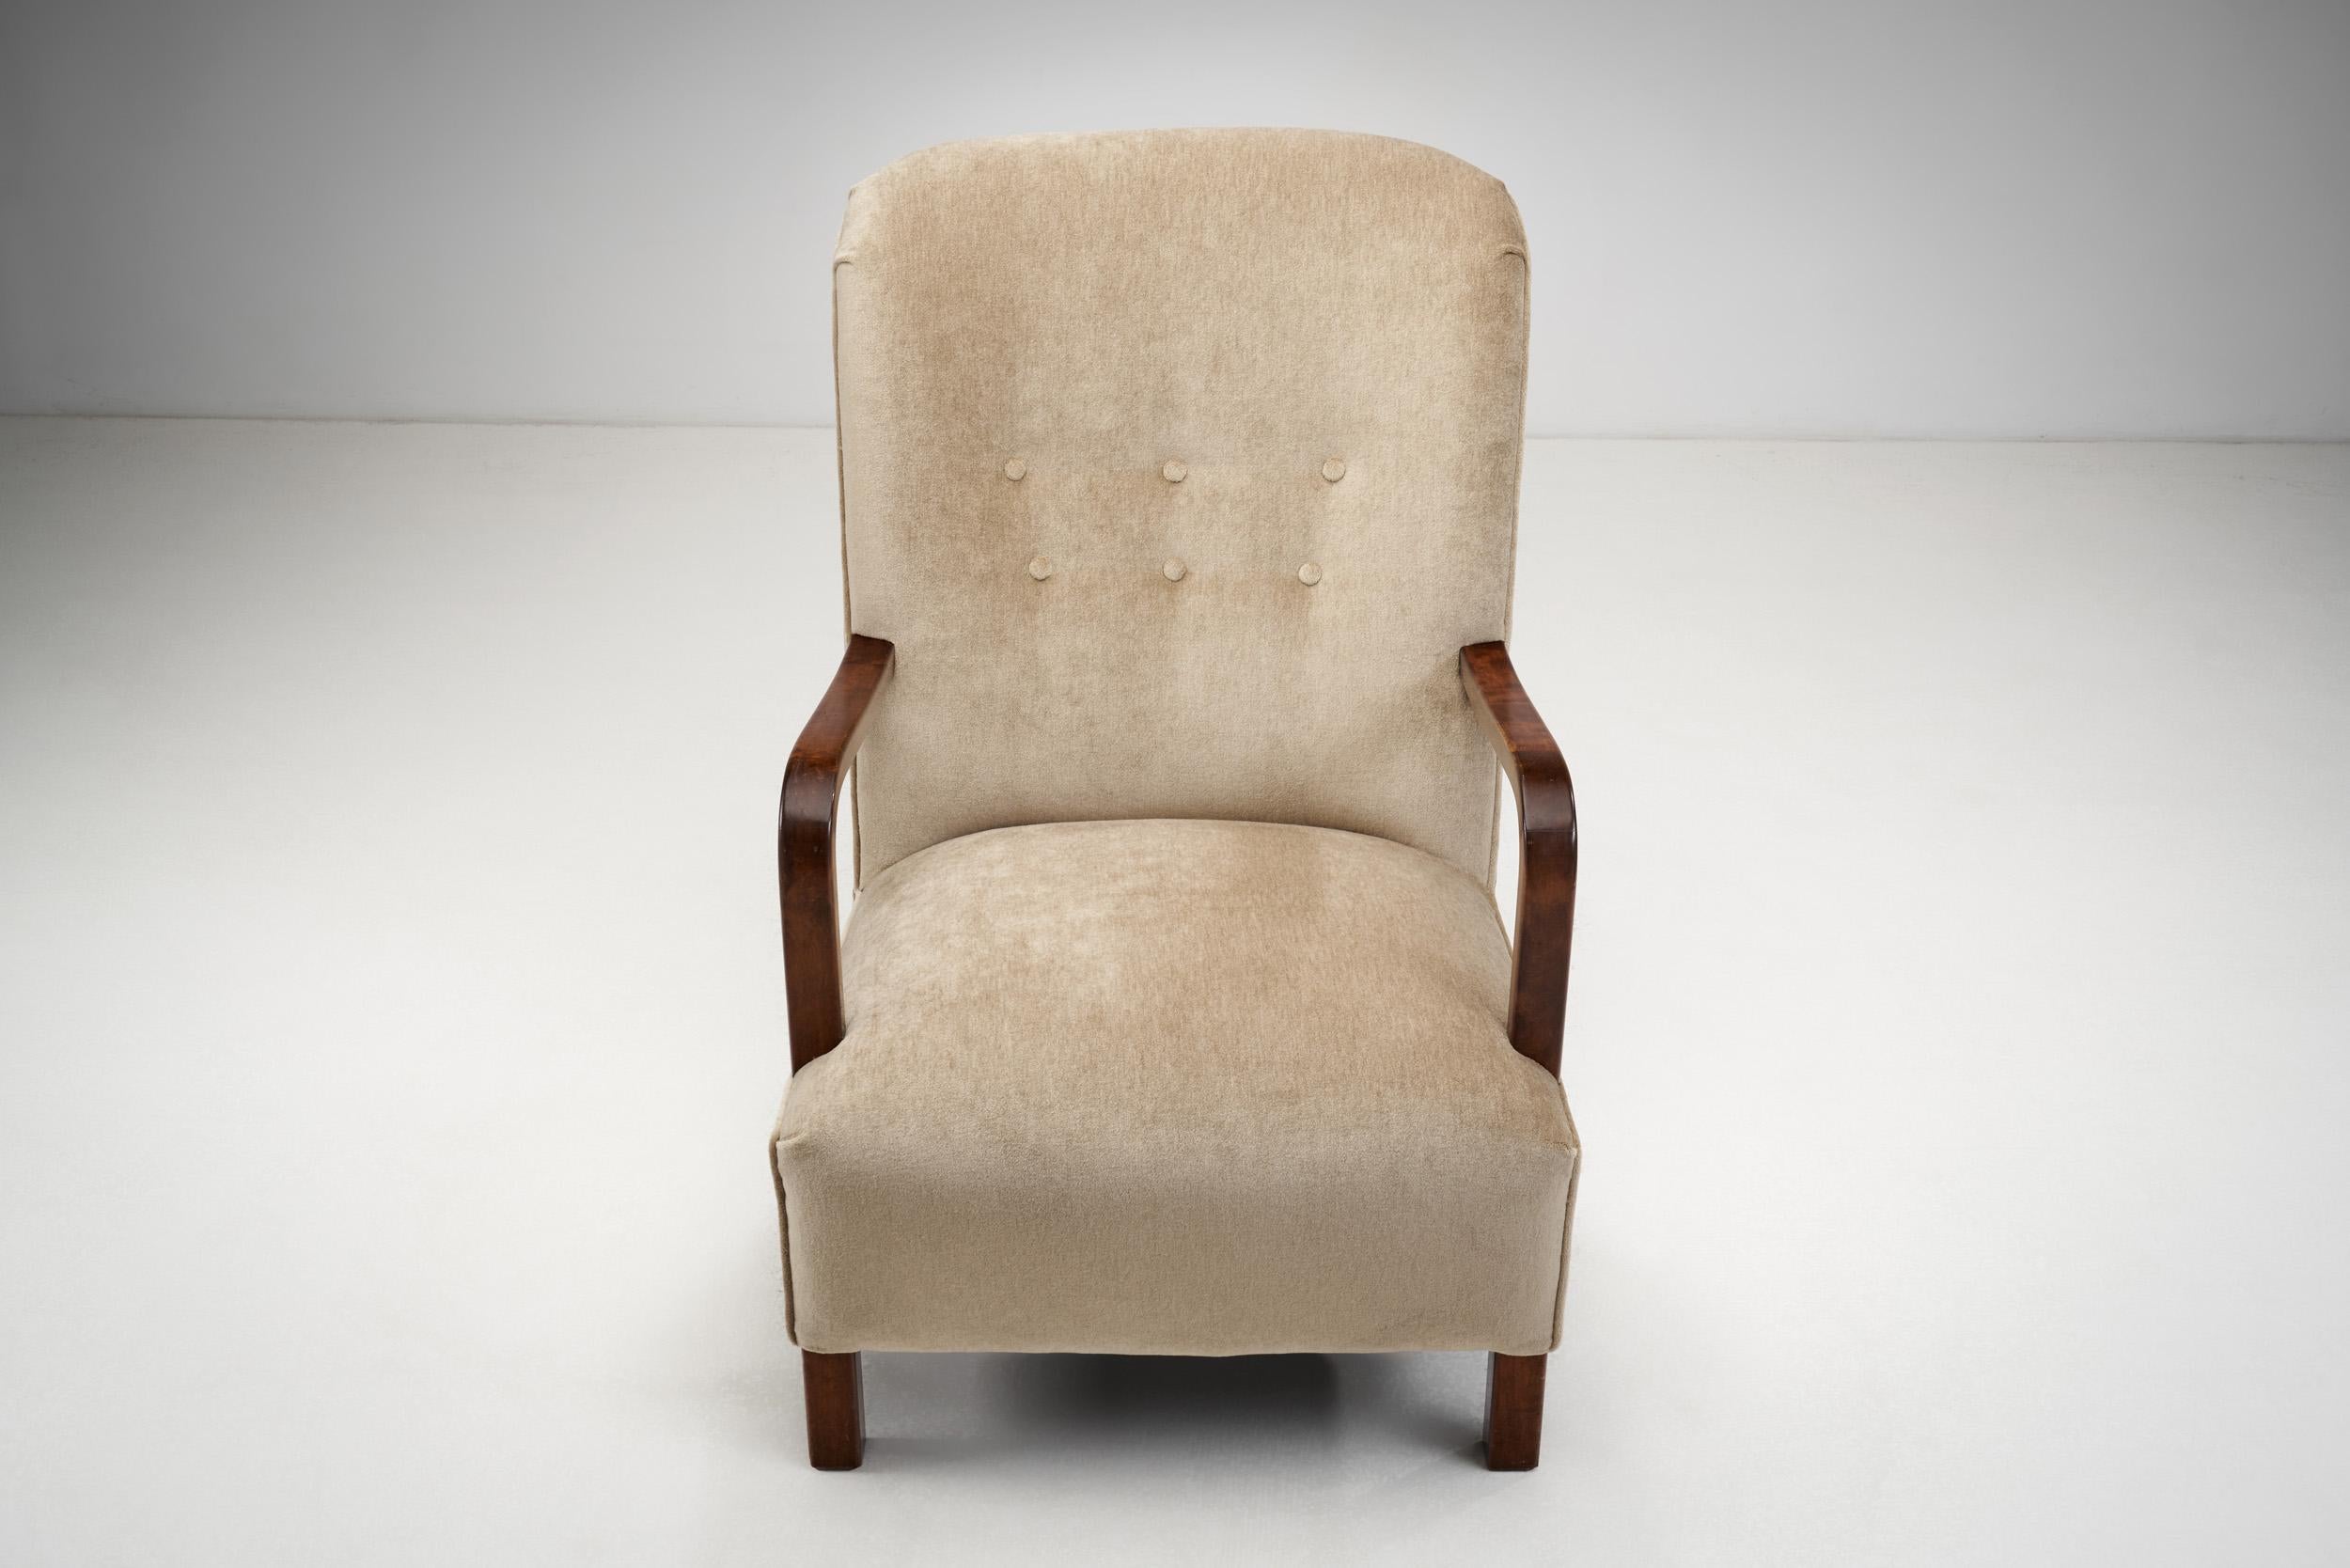 Mid-20th Century Upholstered Lounge Chairs with Sculptural Arms, Europe ca 1940s For Sale